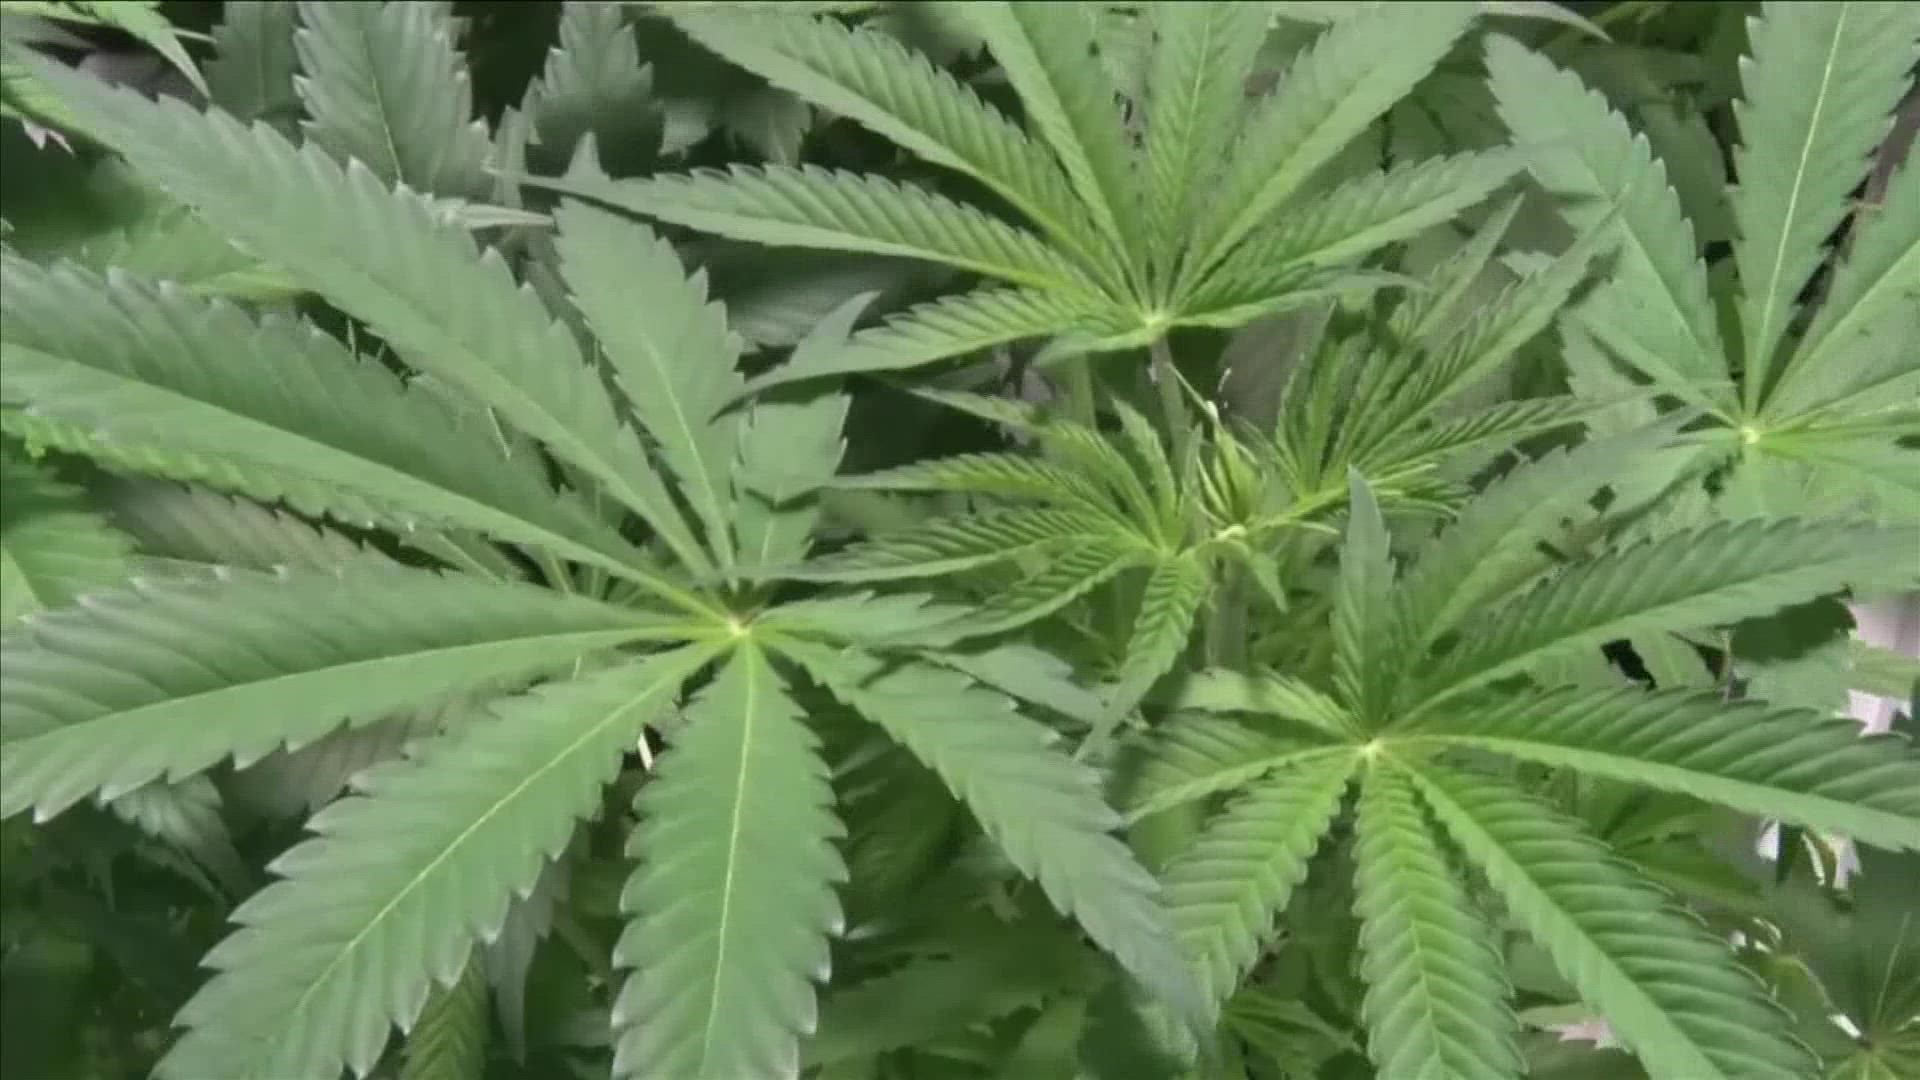 Despite failing on election night, some Arkansas leaders say the measure to legalize recreational marijuana in the state might come back in the future.